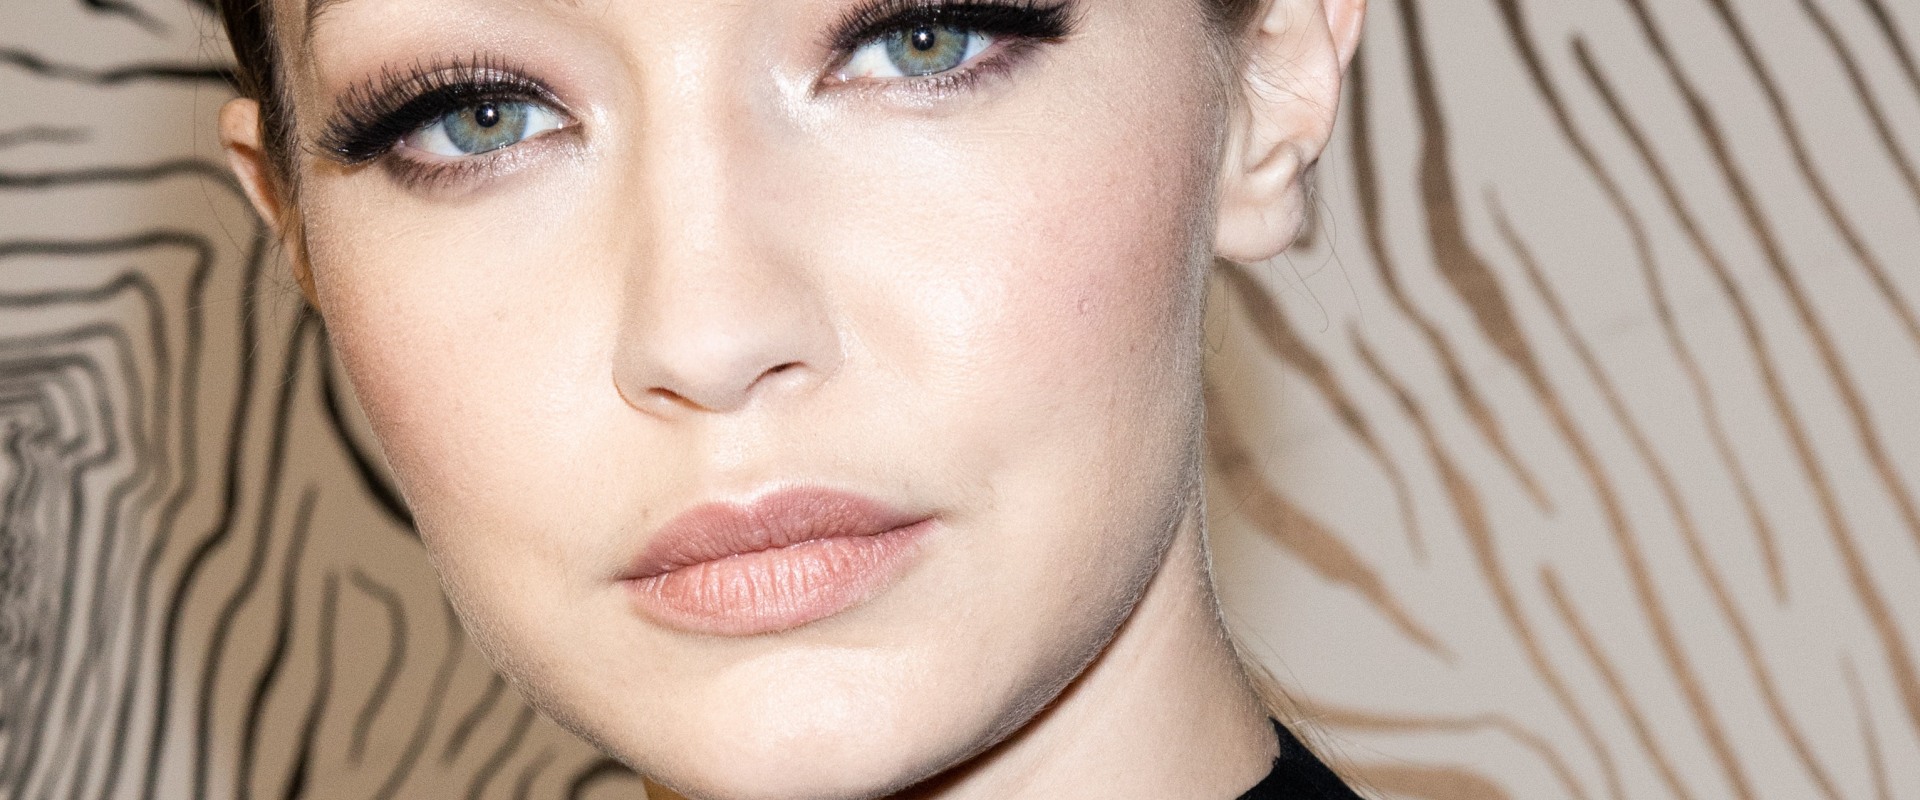 When Should You Get Your Lashes Done Before a Special Event?